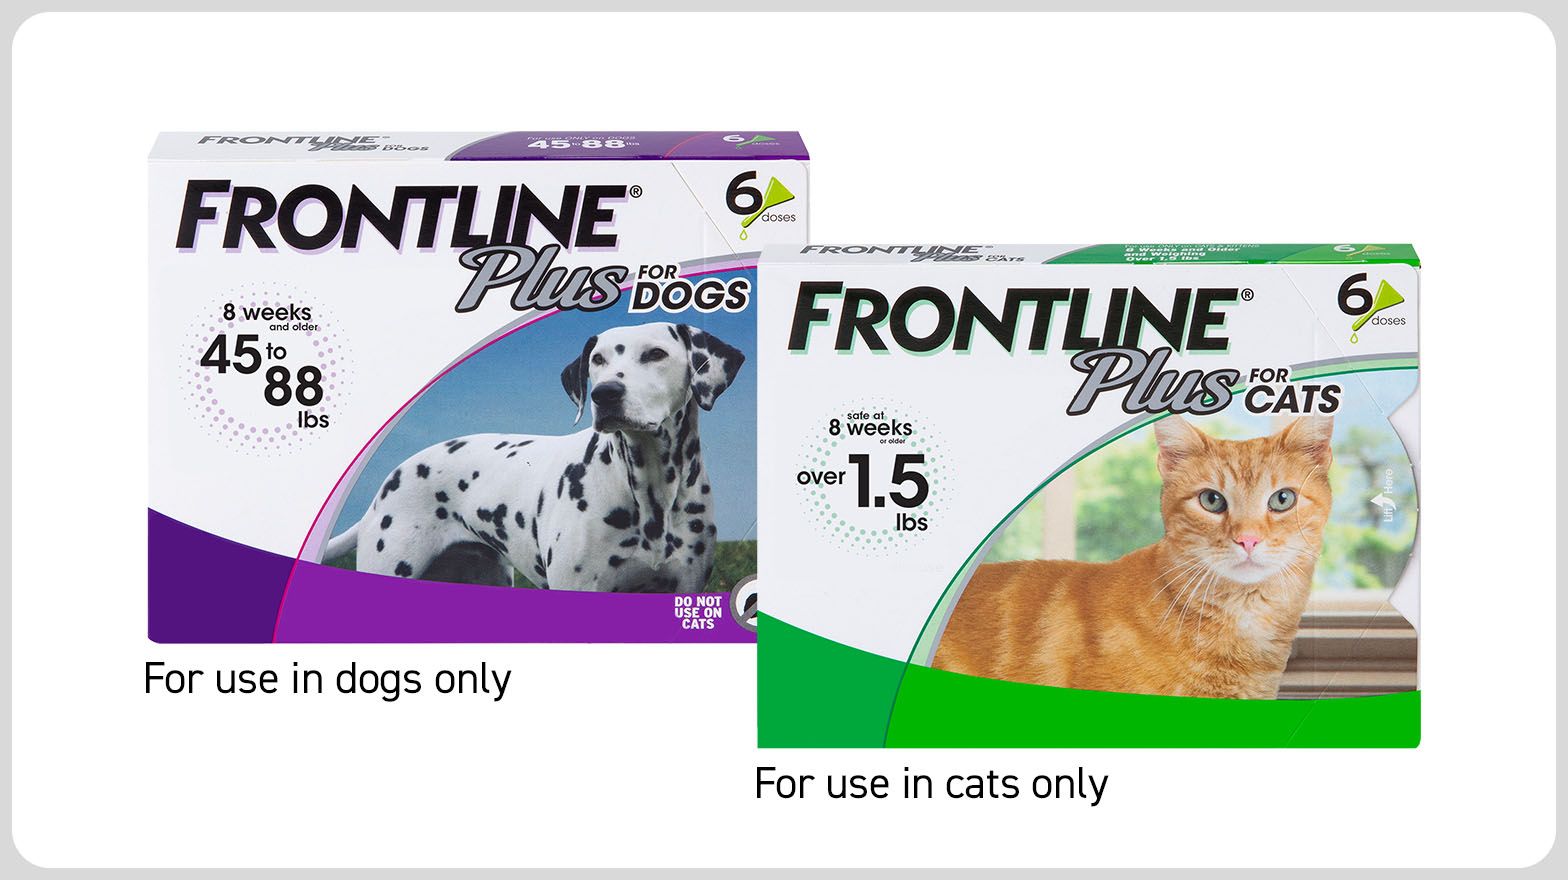 Frontline Plus for Dogs or Cats